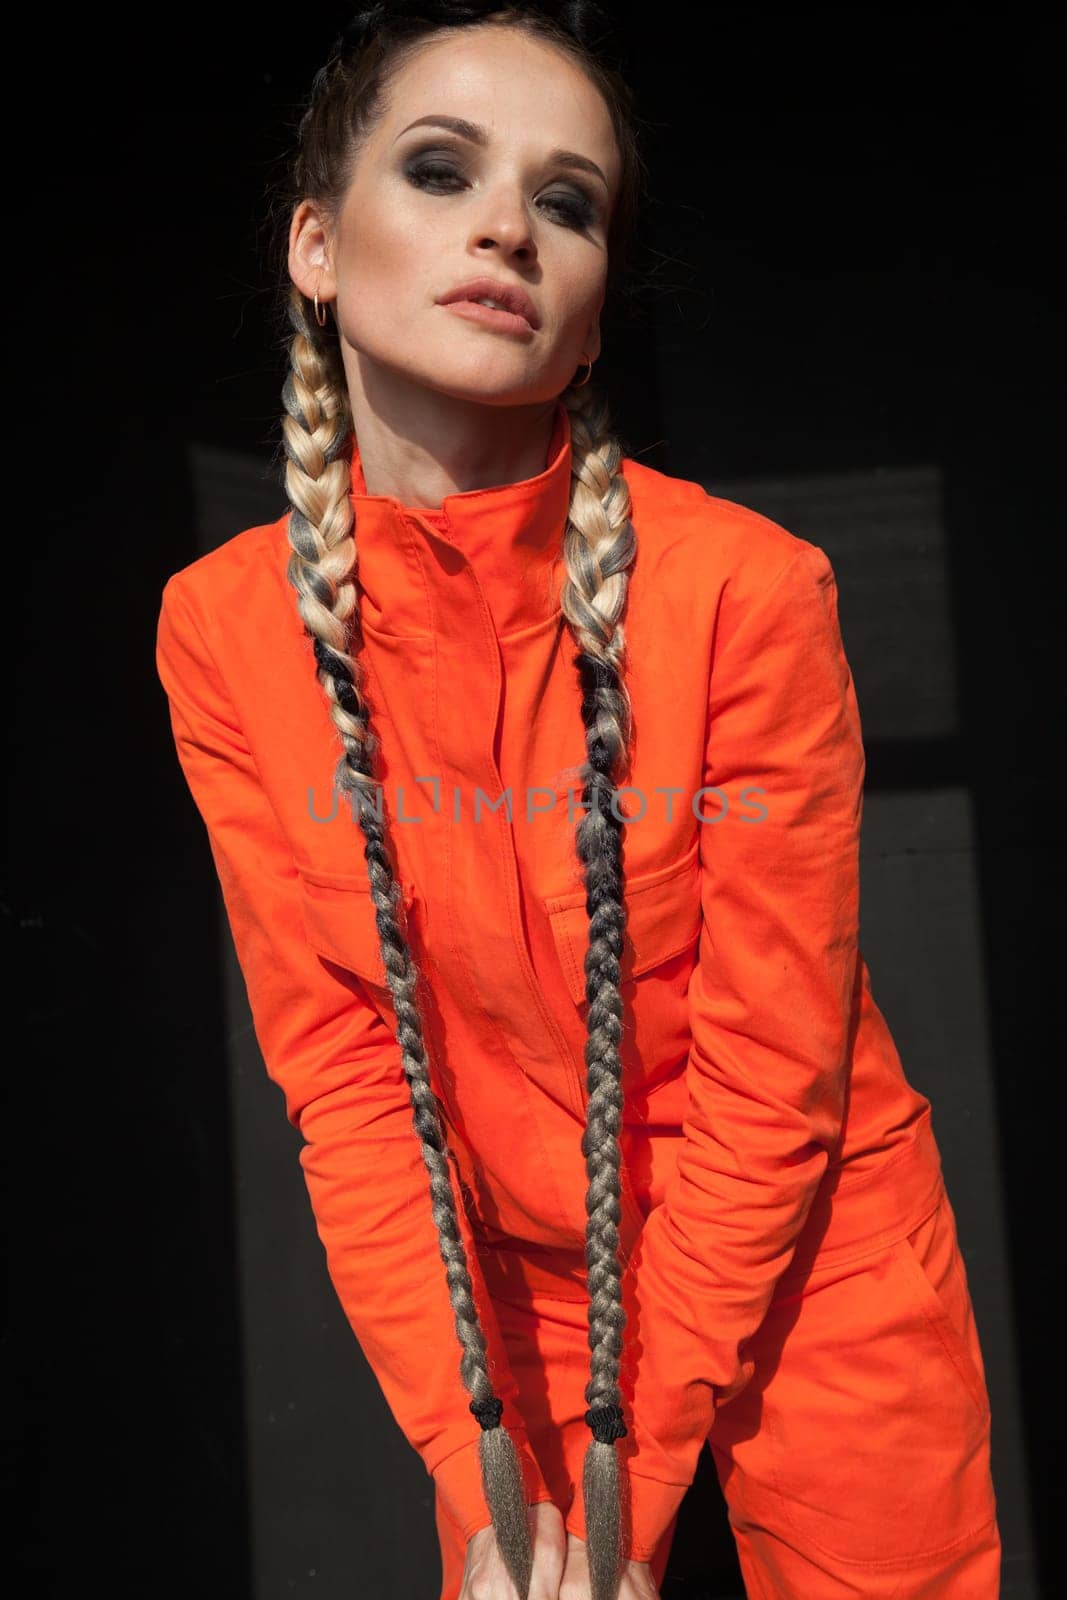 portrait of a beautiful woman with braids in orange work clothes